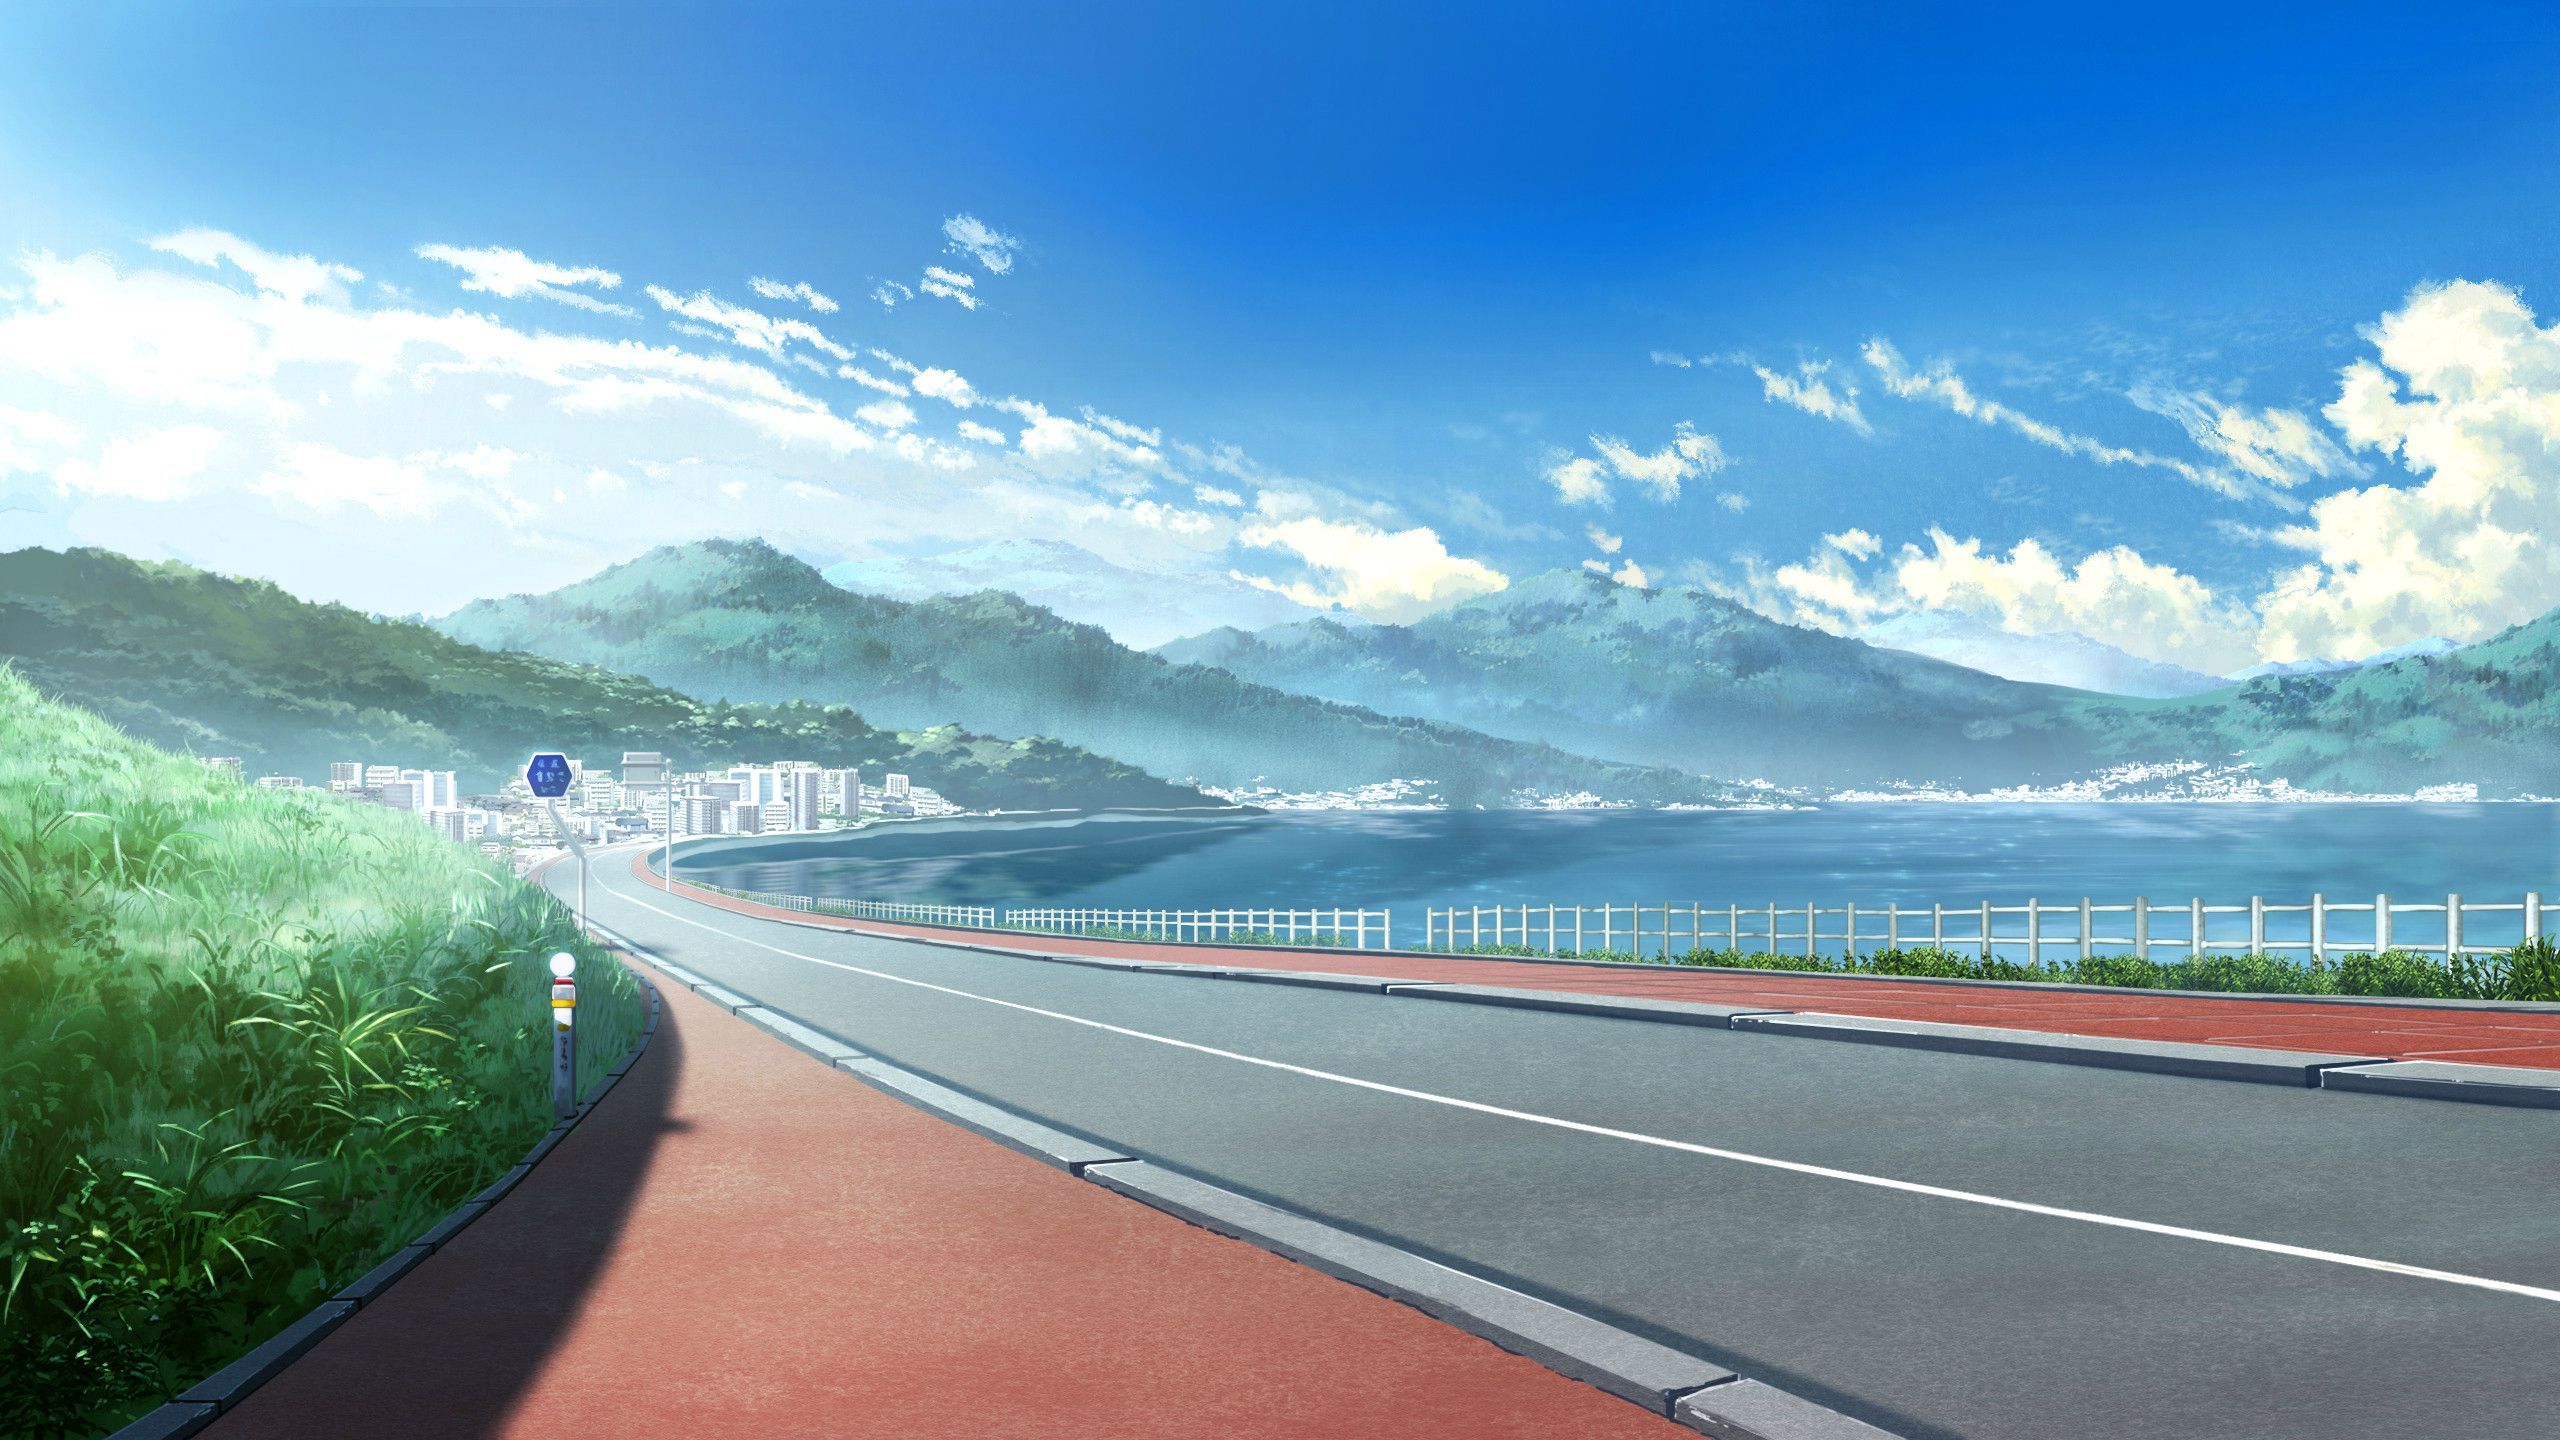 Anime scenery wallpaper with a road going through the mountains - Japan